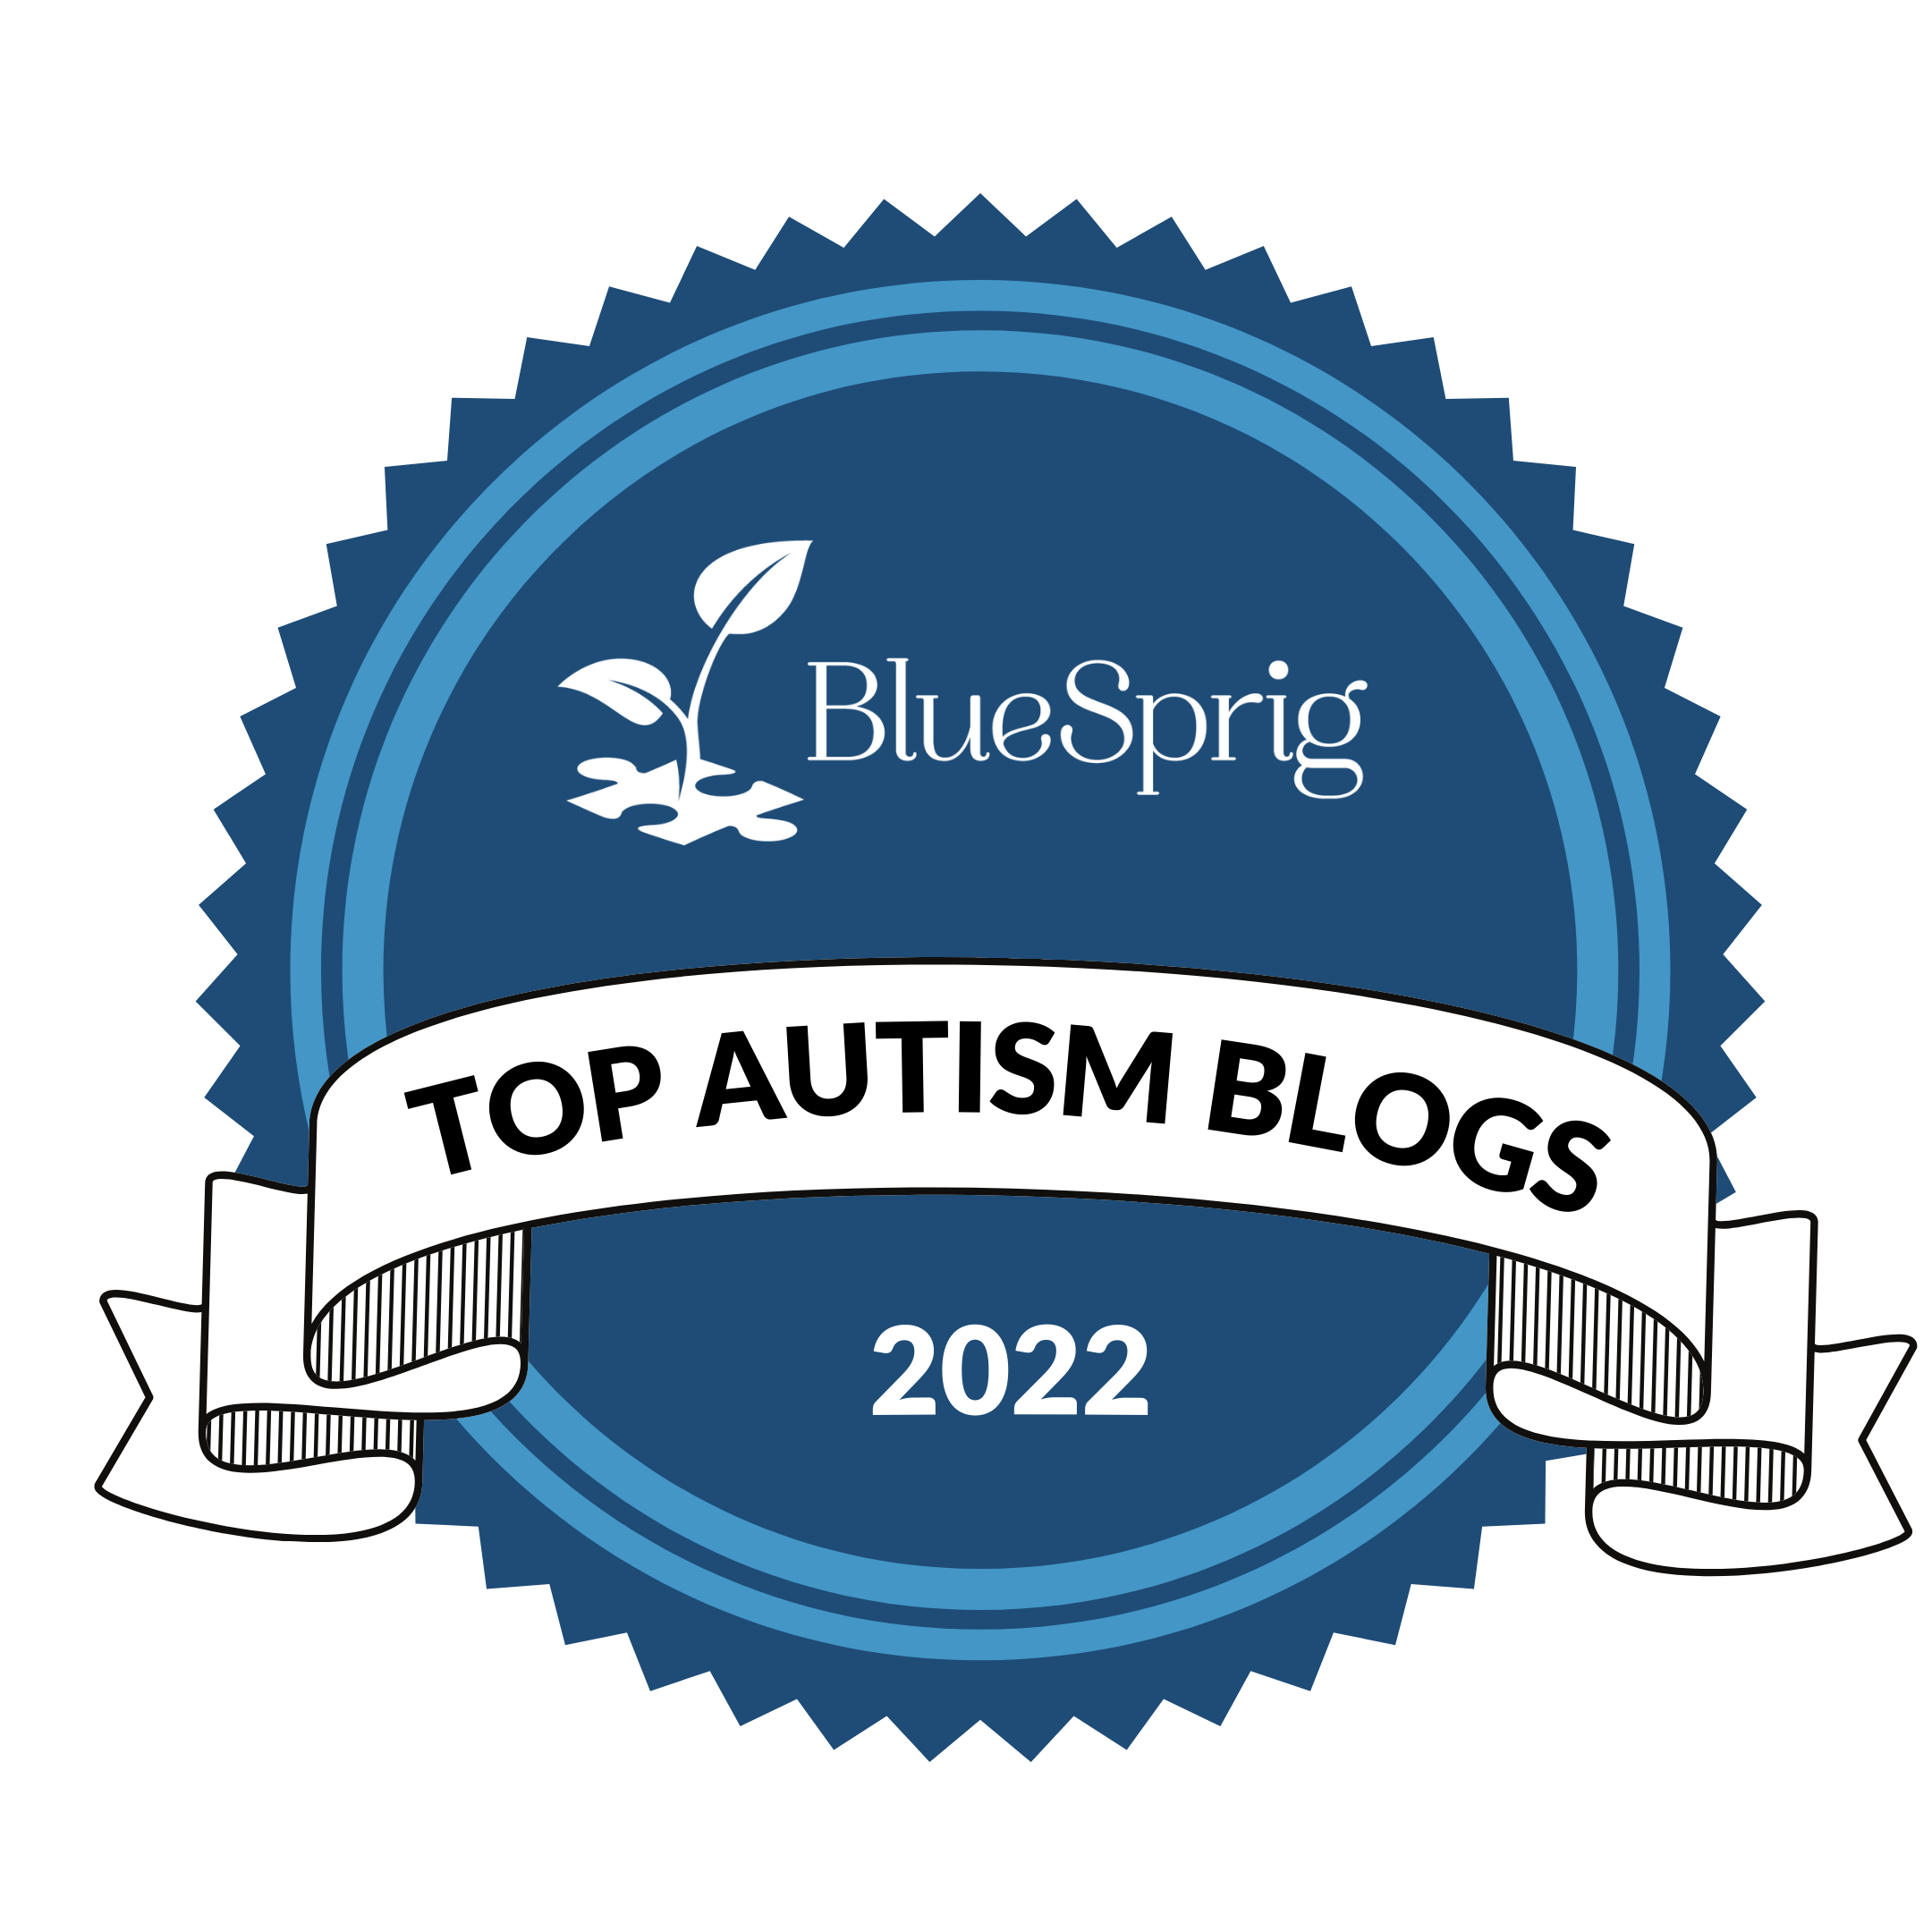 Top Autism Blogs of 2022